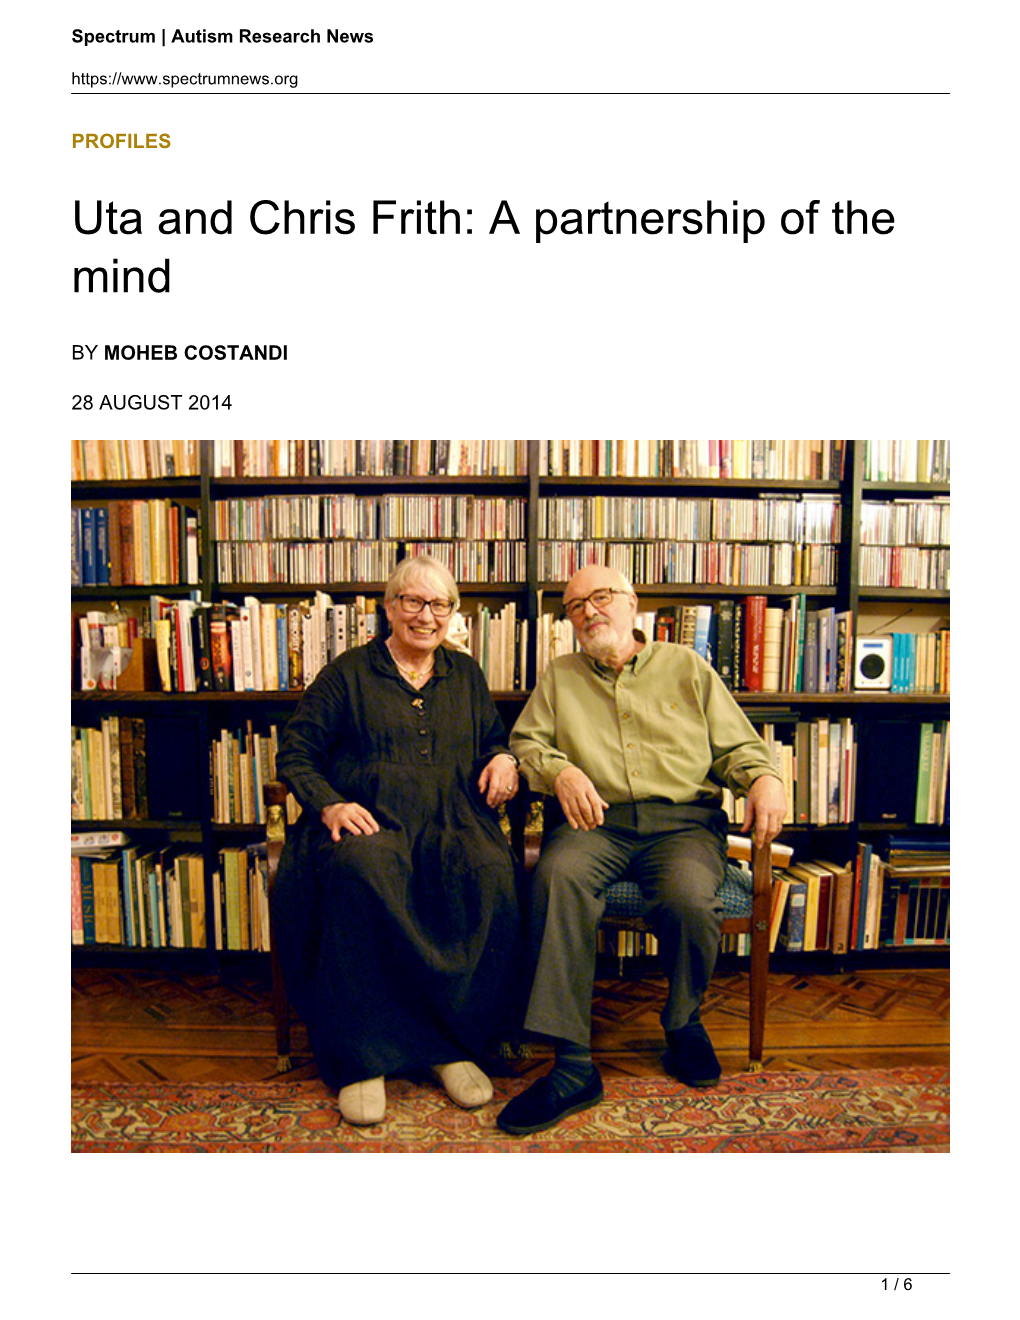 Uta and Chris Frith: a Partnership of the Mind